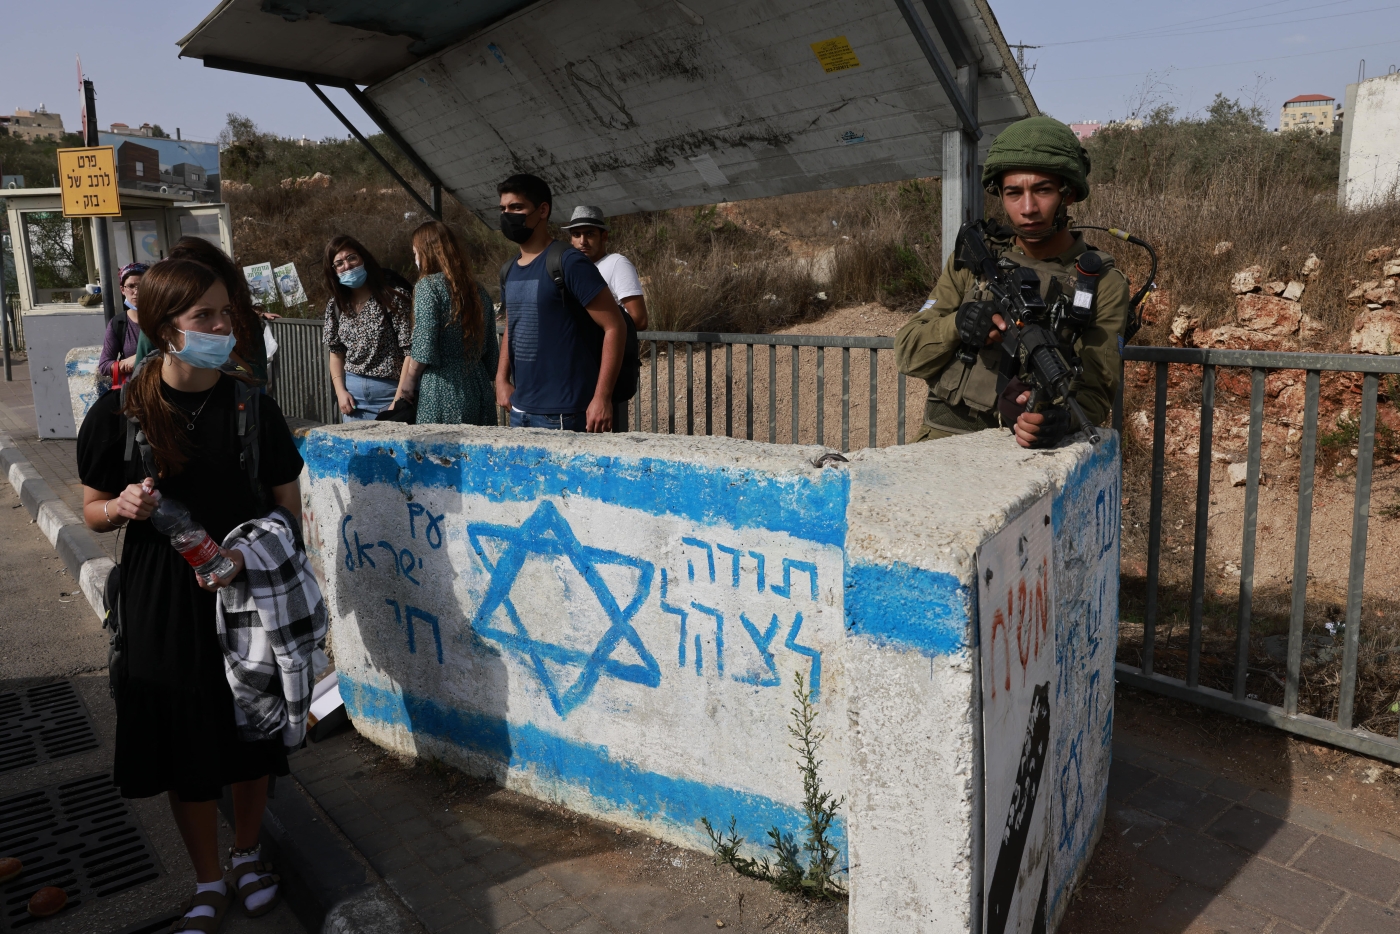 An Israeli soldier on guard at a bus station near the Jewish settlement of Ariel in the occupied West Bank on 14 October 2021 (AFP)